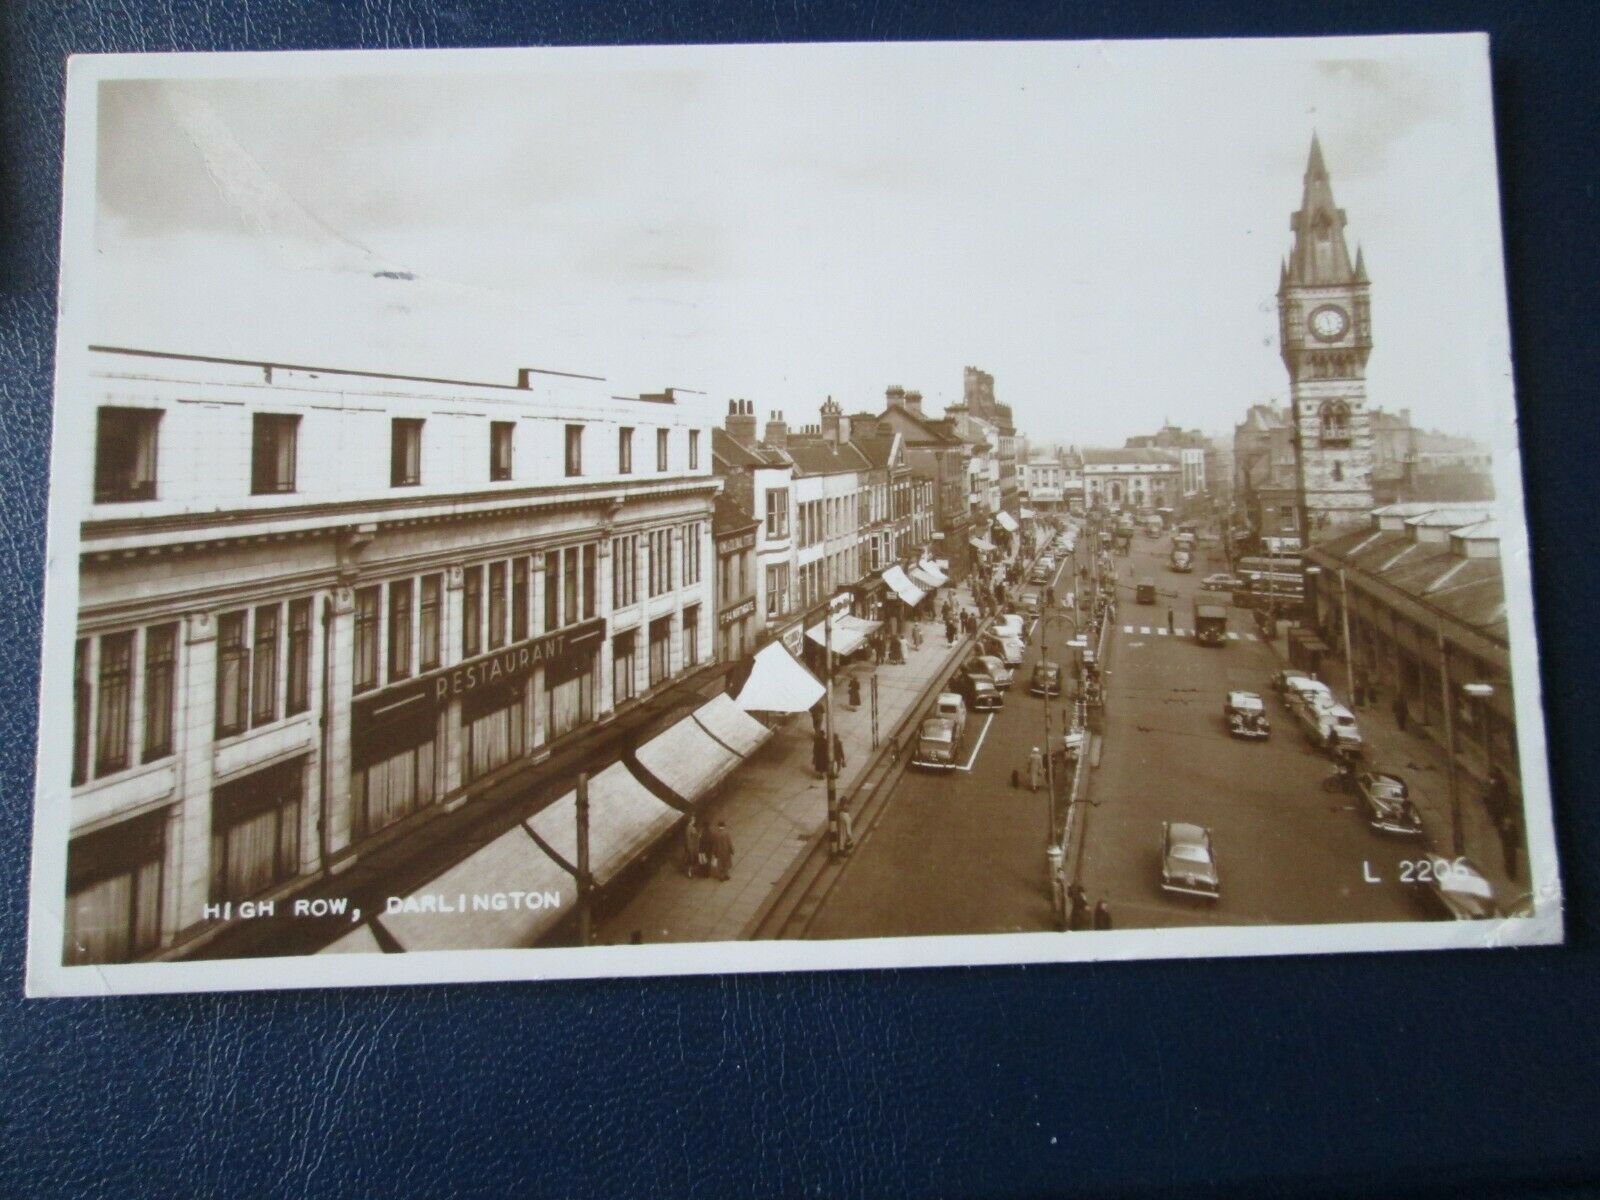 House Clearance - Service of High Row, Darlington (Posted 1959 RP) L2206 showing shops & cars